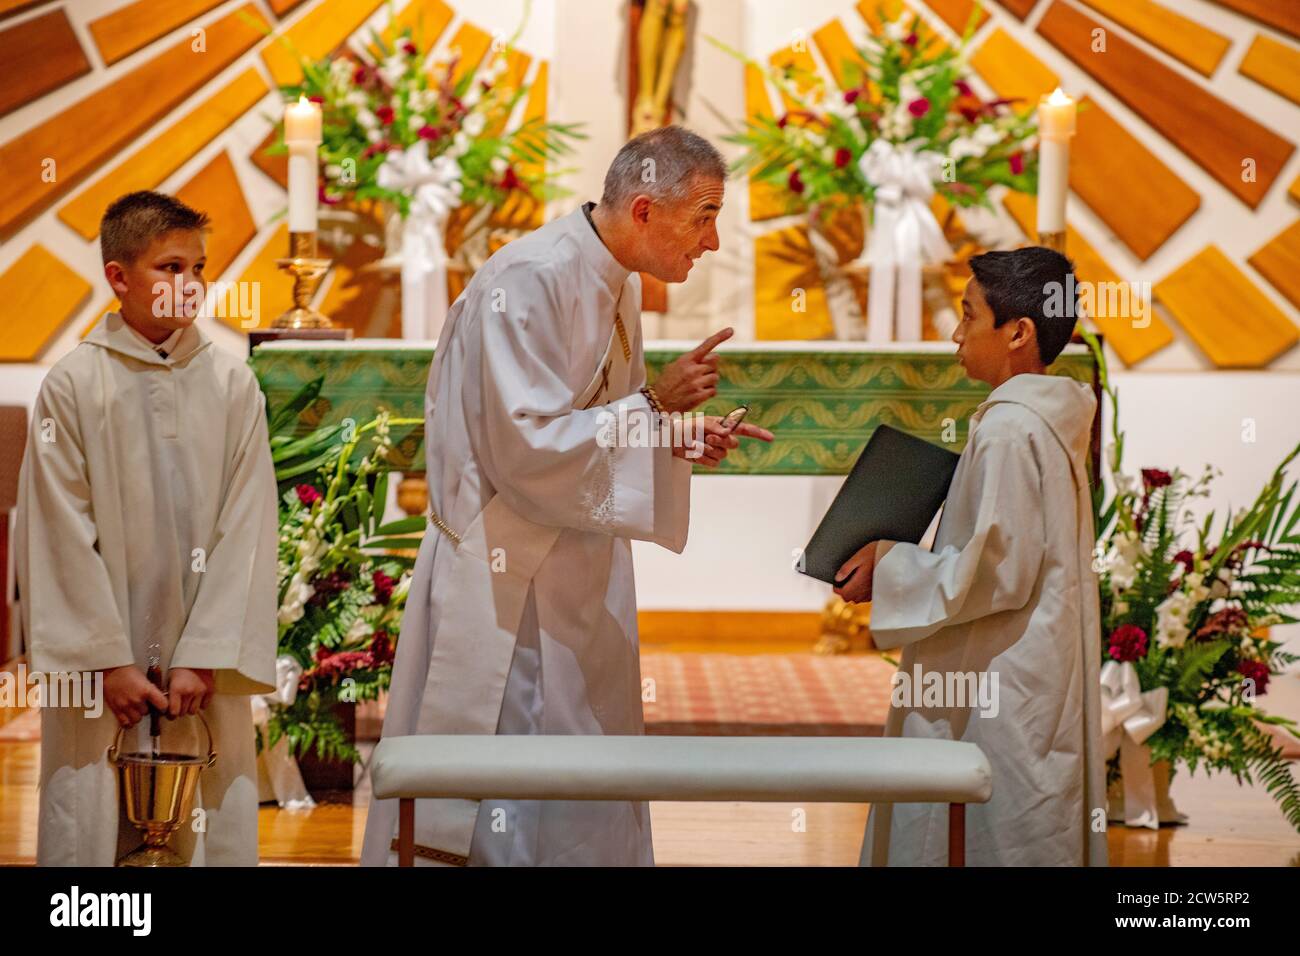 At a Southern California Catholic church, a robed deacon with a picture sash converses with two young boy altar assistant before celebrating a mass. Stock Photo